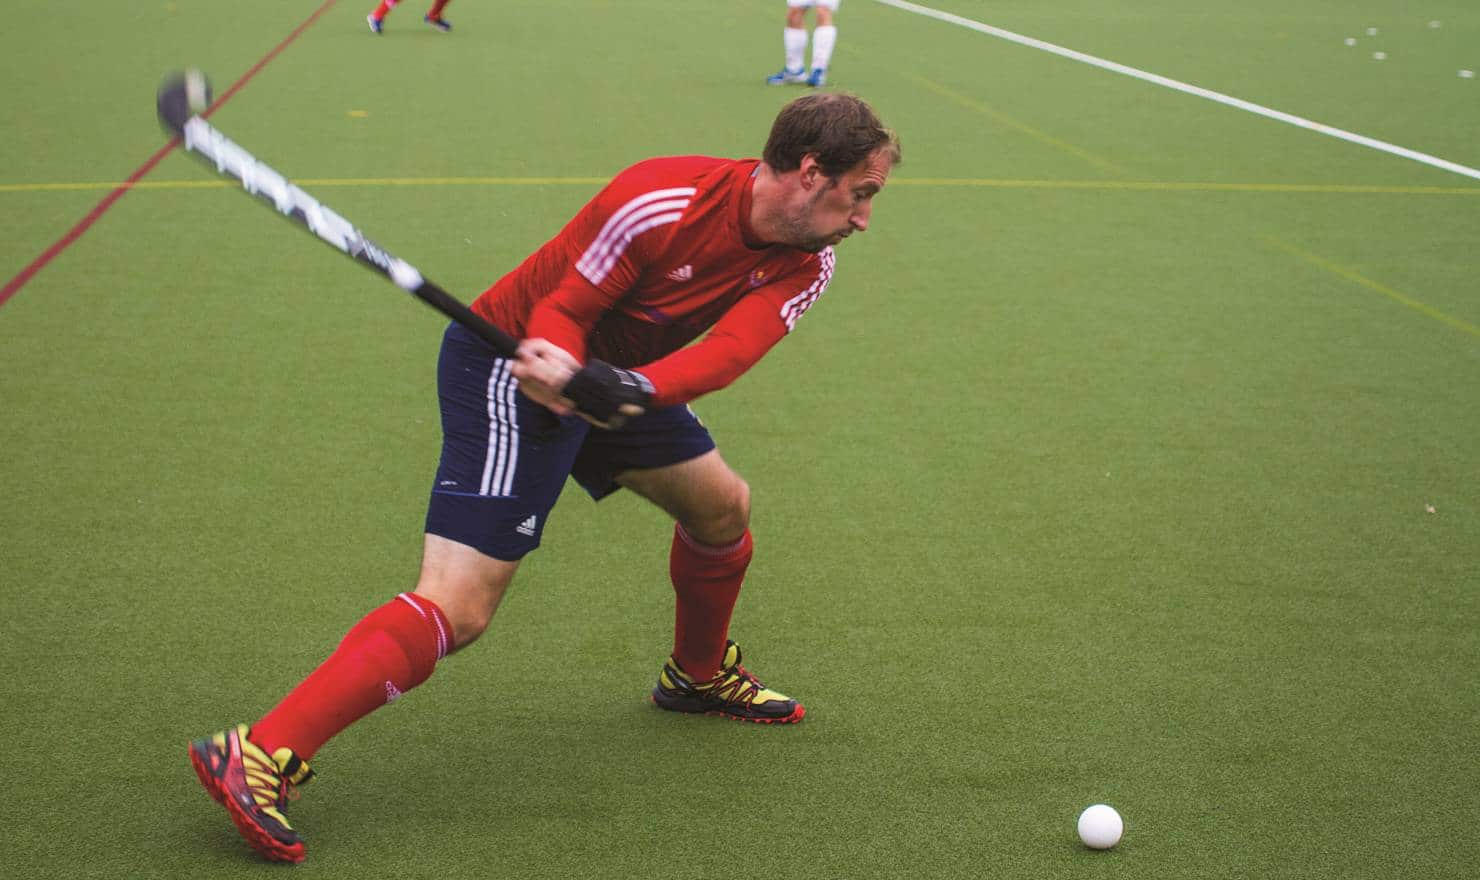 Hockey: Tunbridge Wells recover from poor start to extend lead at top